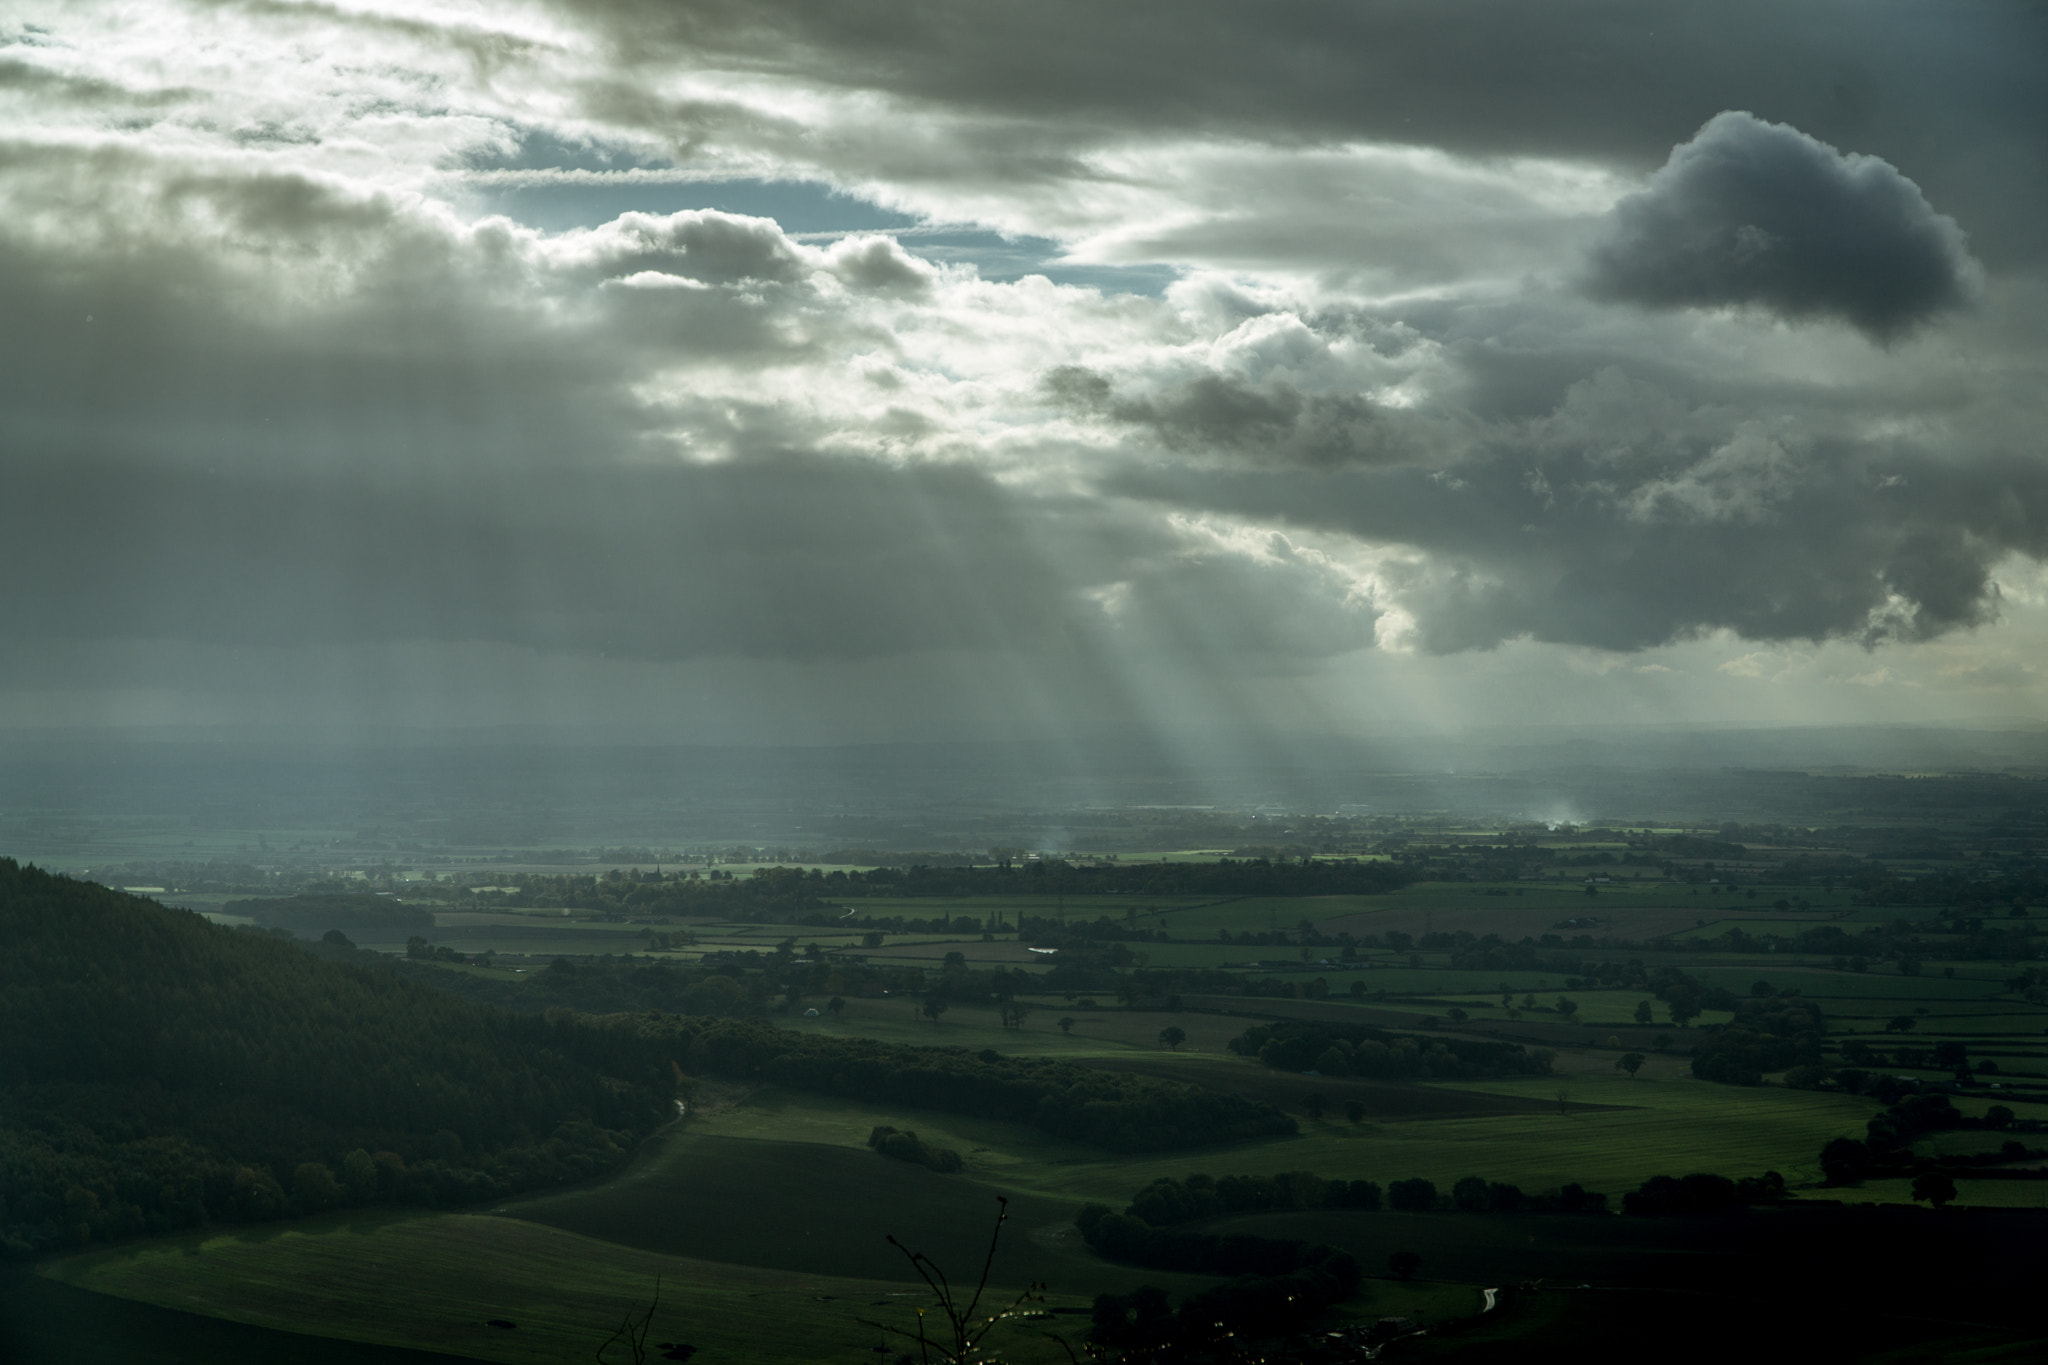 Sony a5100 sample photo. Sutton bank - rains approaching photography